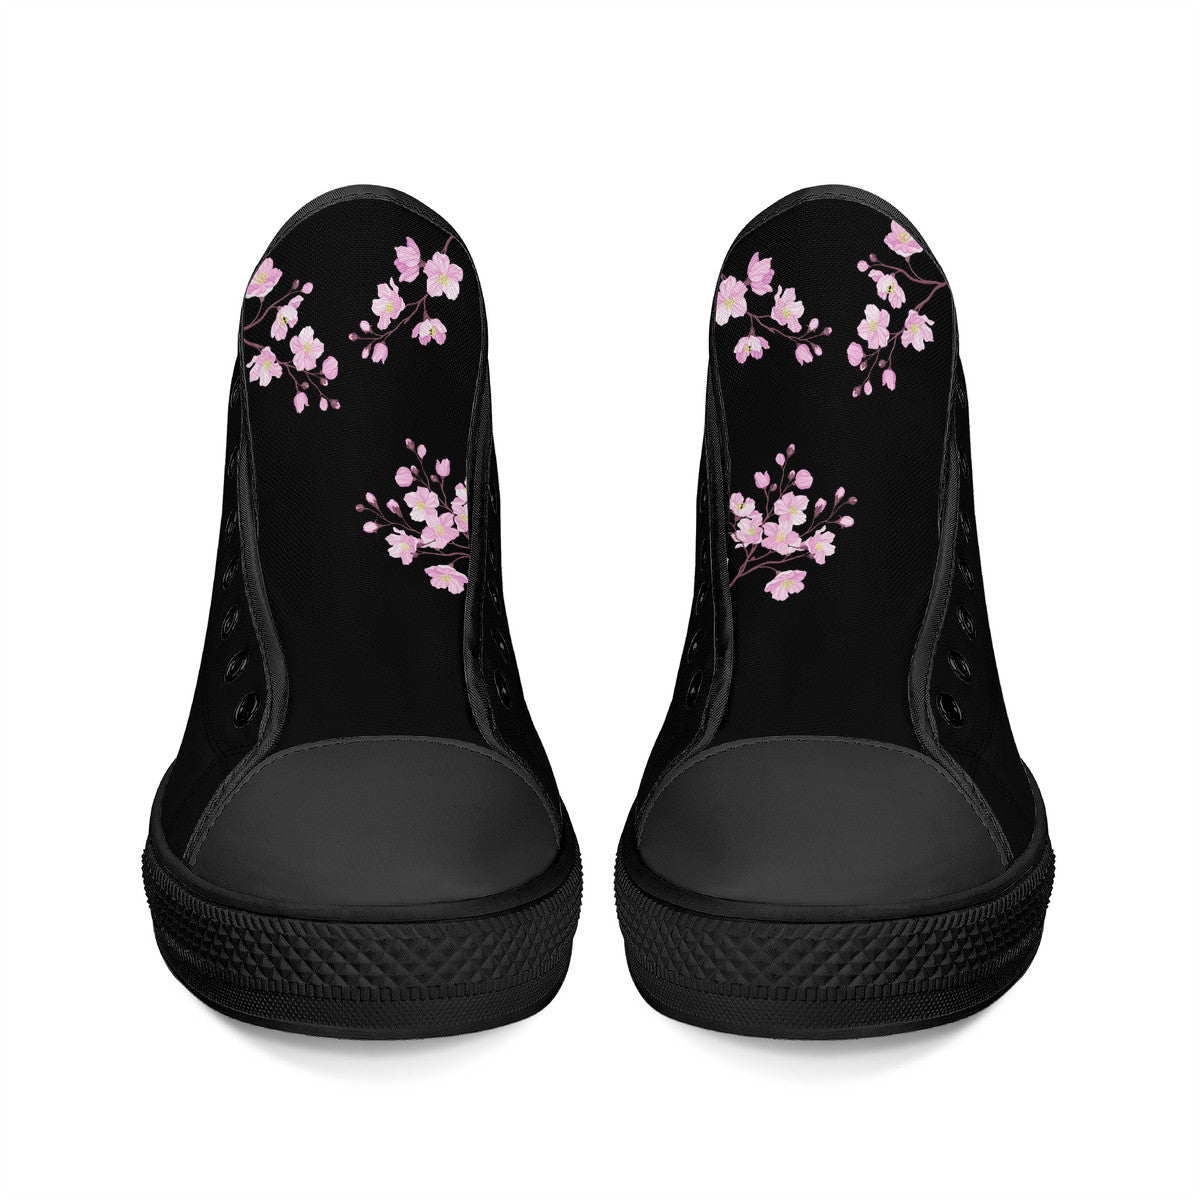 Cherry Blossom High-Top Canvas Shoes Black